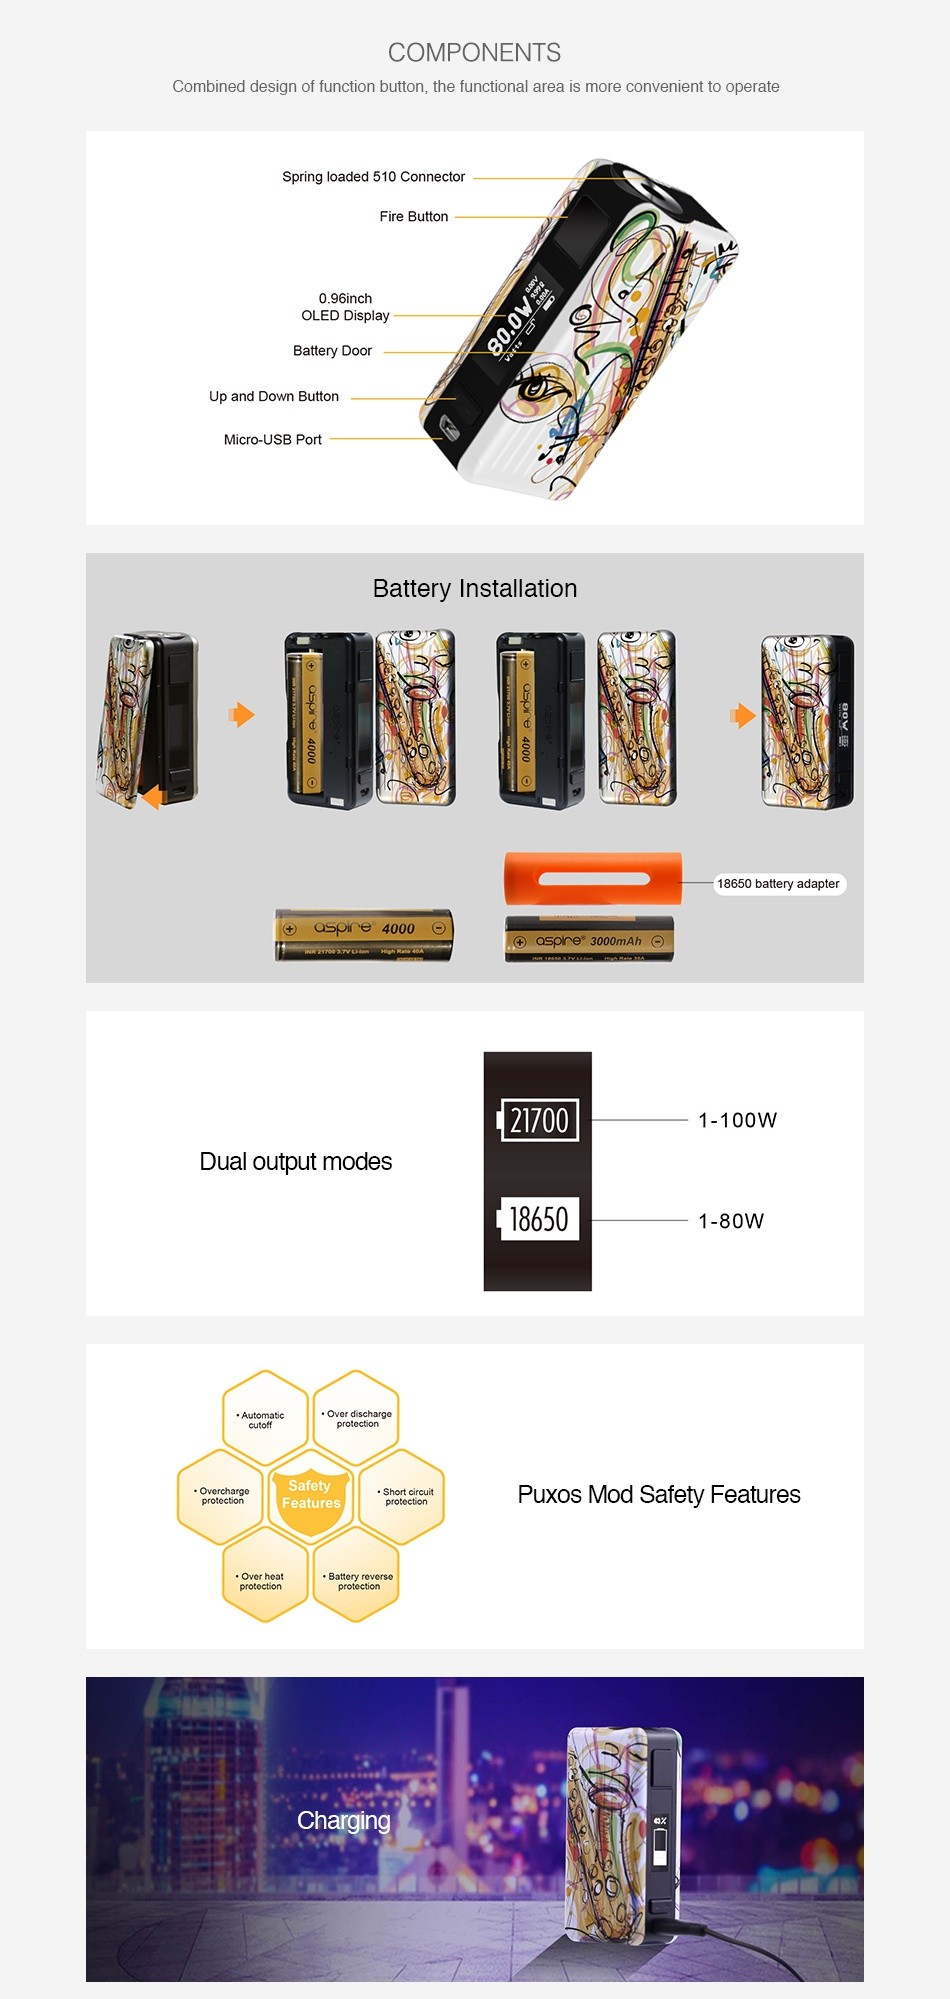 Aspire Puxos 80/100W TC Box MOD COMPONENTS Combined design of function button  the functional area is more convenient to operate Spring loaded 510 Connector Fire button Battery D Up and down Button M USB Port Battery Installation 18650 battery adapter  Qspe3000mAh  2 1 100W Dual output mode 1 80W Overcharge Short cireuit Puxos Mod Safety Features Over hea Battery Charging